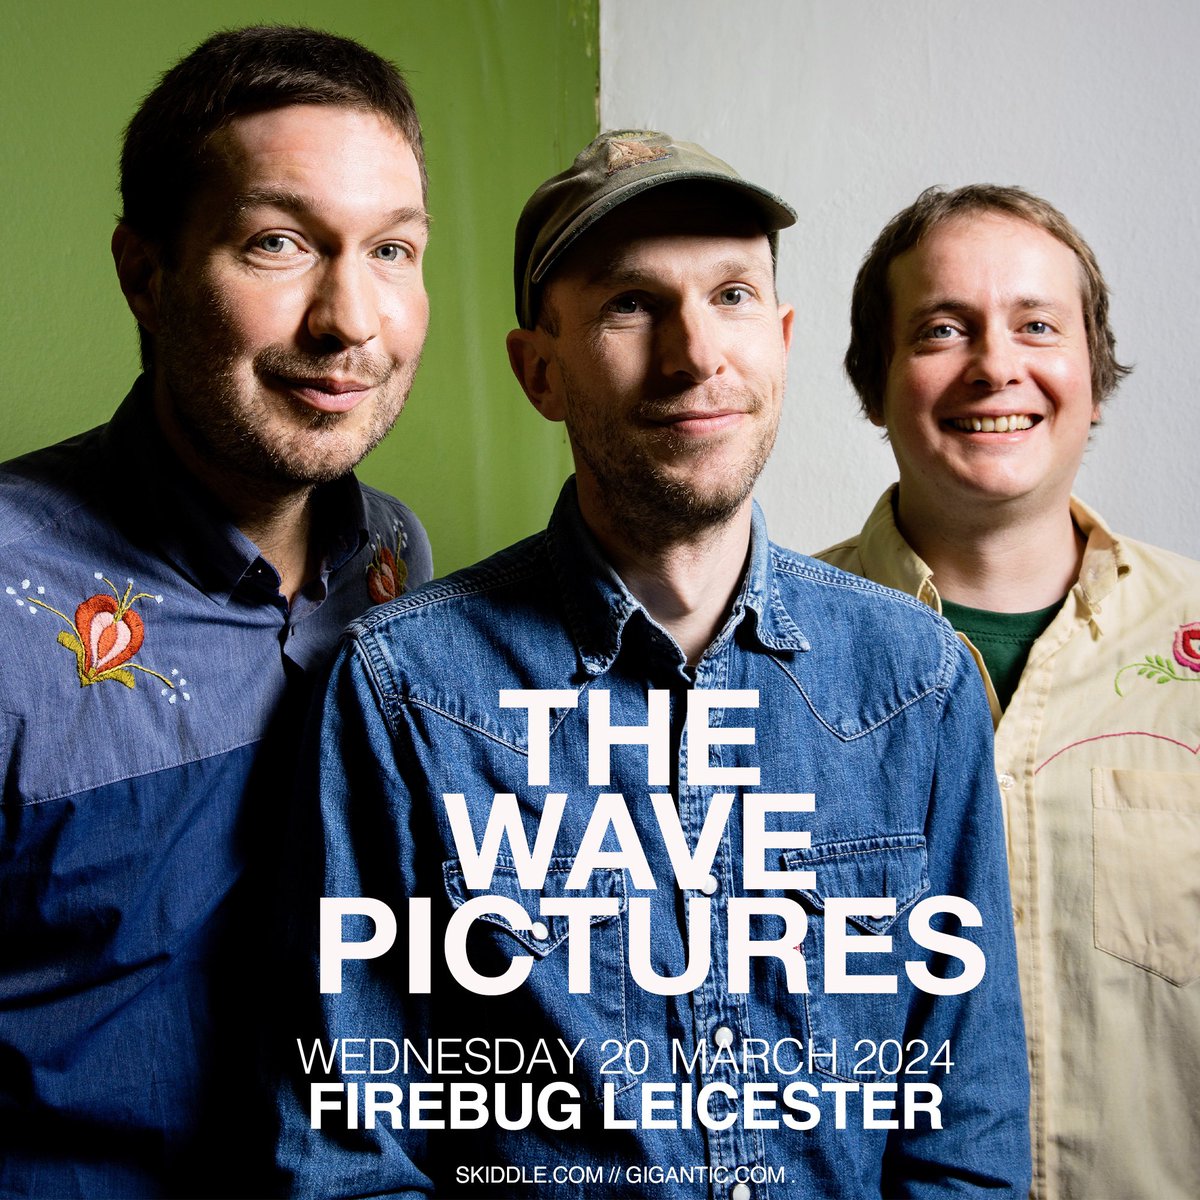 Only 20 tix left for the return of @TheWavePictures at @FirebugBar gigantic.com/the-wave-pictu…